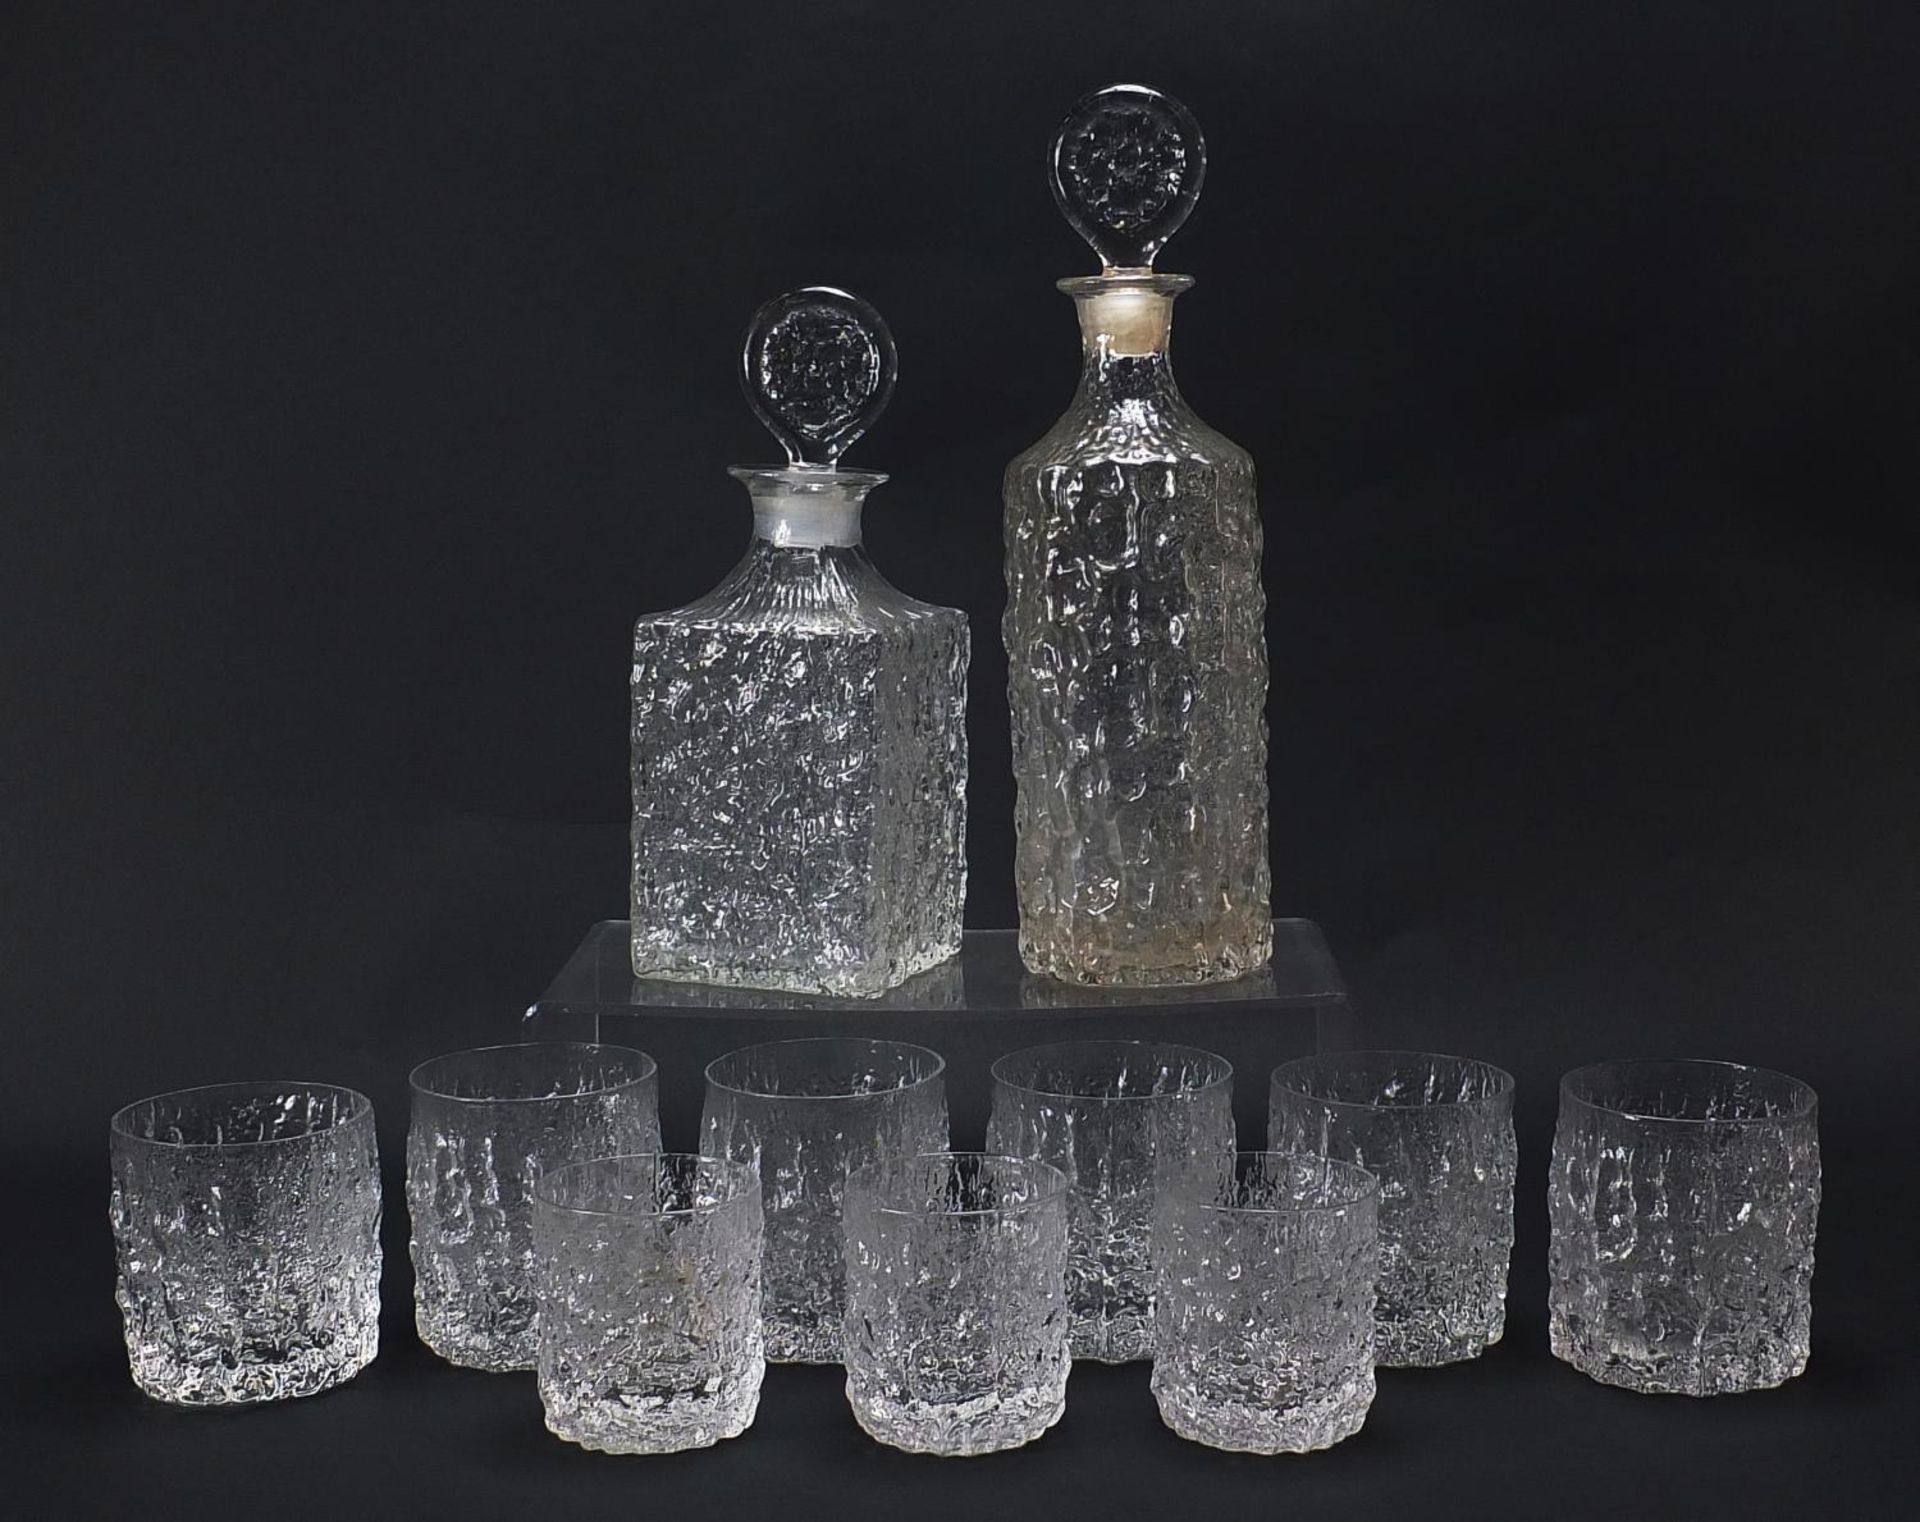 Geoffrey Baxter for Whitefriars, textured glassware comprising two decanters, set of six tumbles and